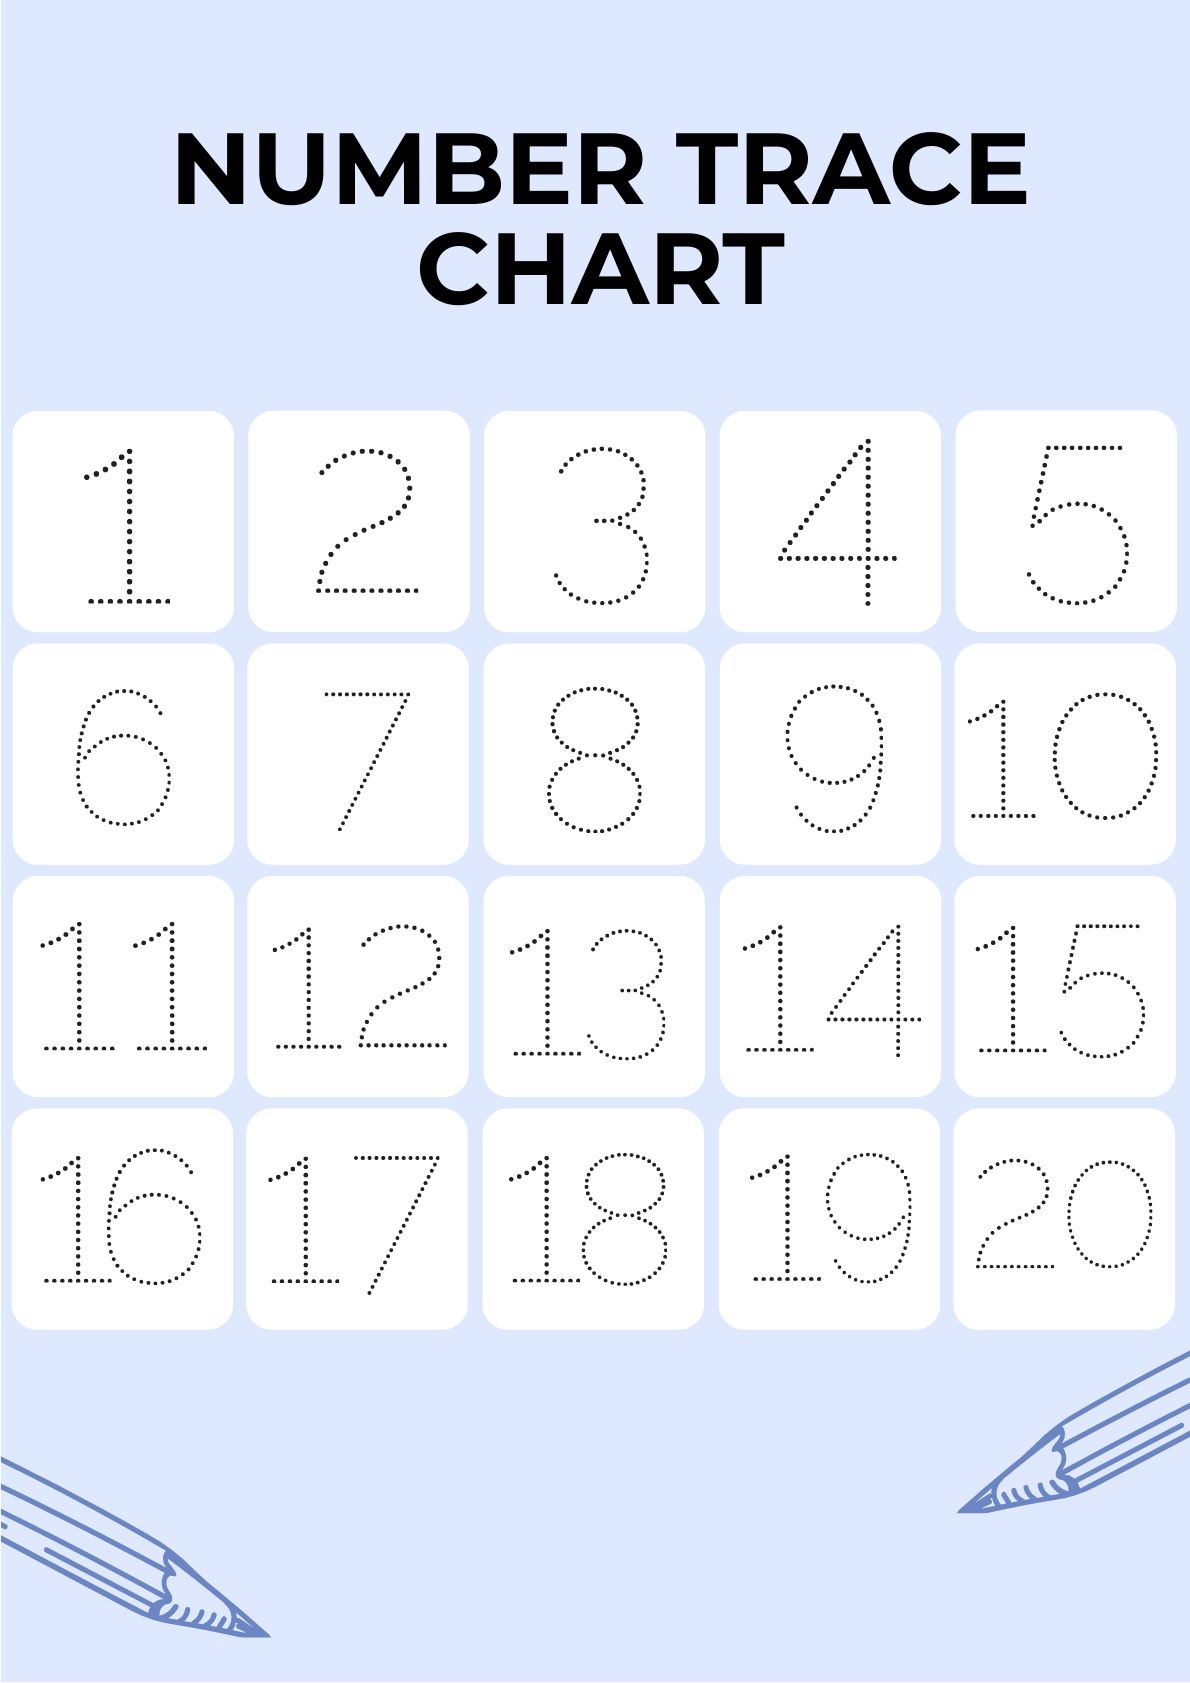 Number Trace Chart in PDF, Illustrator